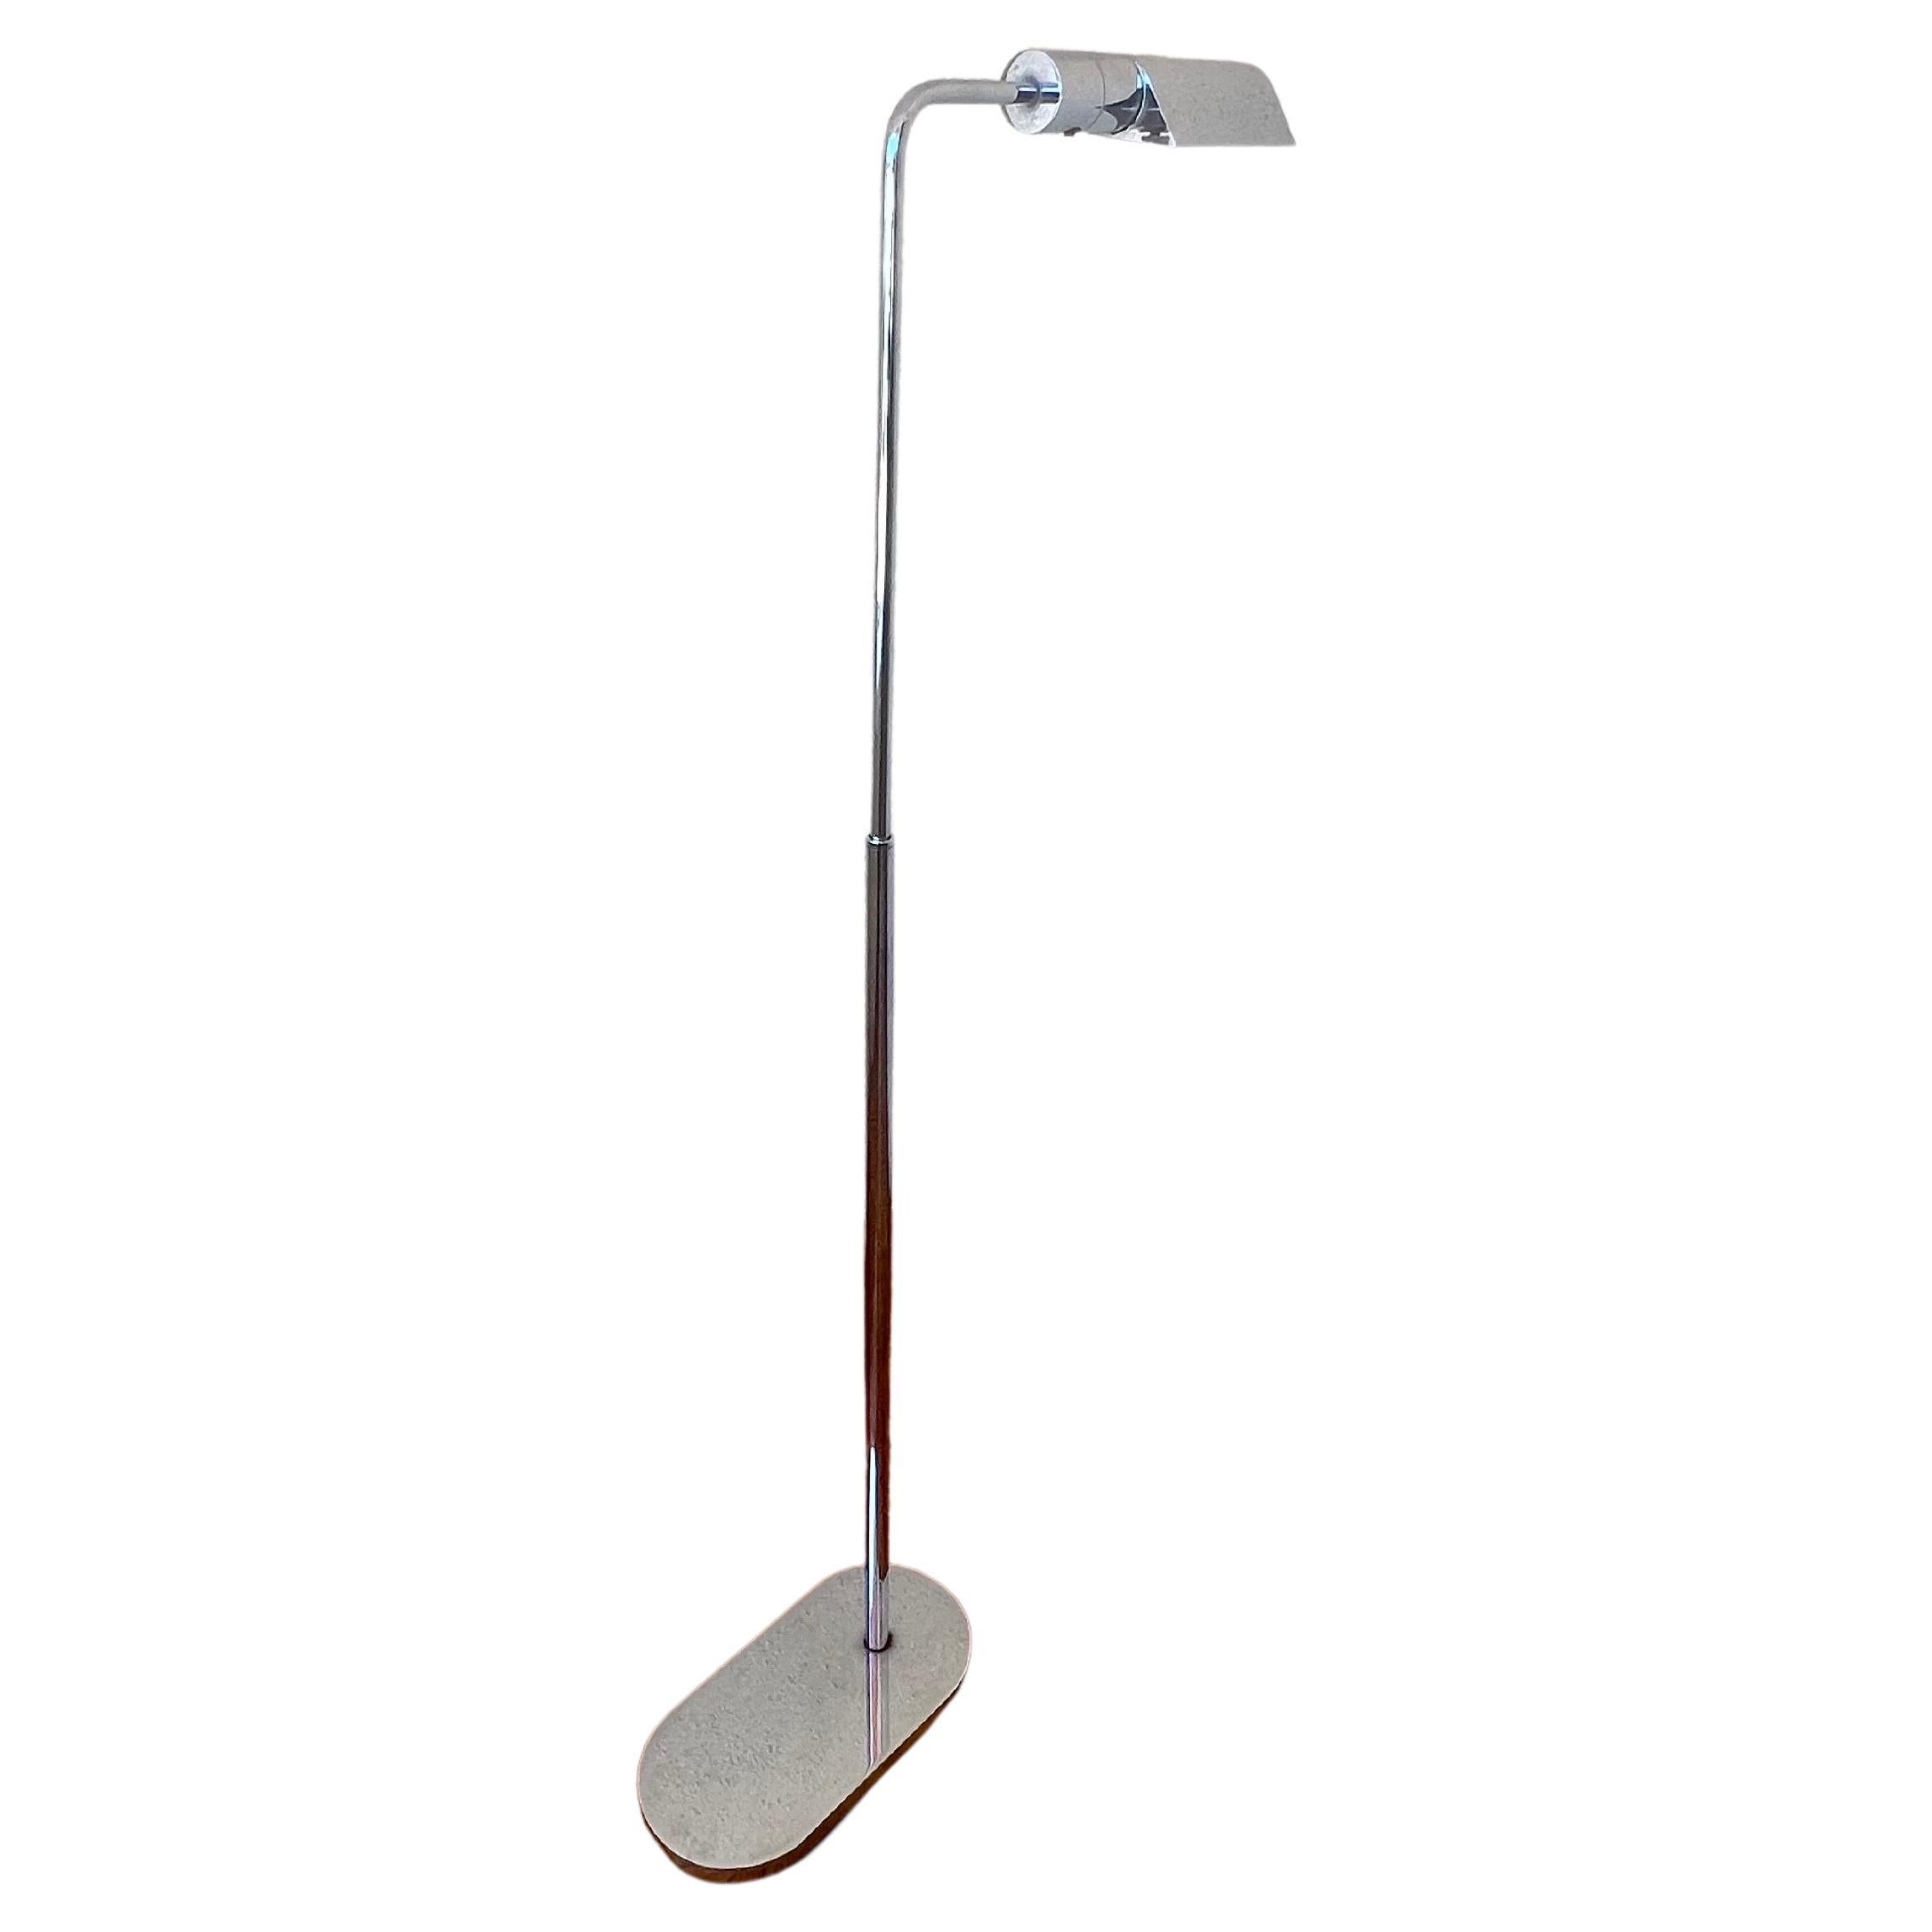 Elegant multi-Directional floor lamp by Casella Lighting of San Francisco. The main lamp pole moves up and down and rotates 360 degrees; the tubular shade also moves from side to side. The lamp, which has a dimmer switch, extends to 48